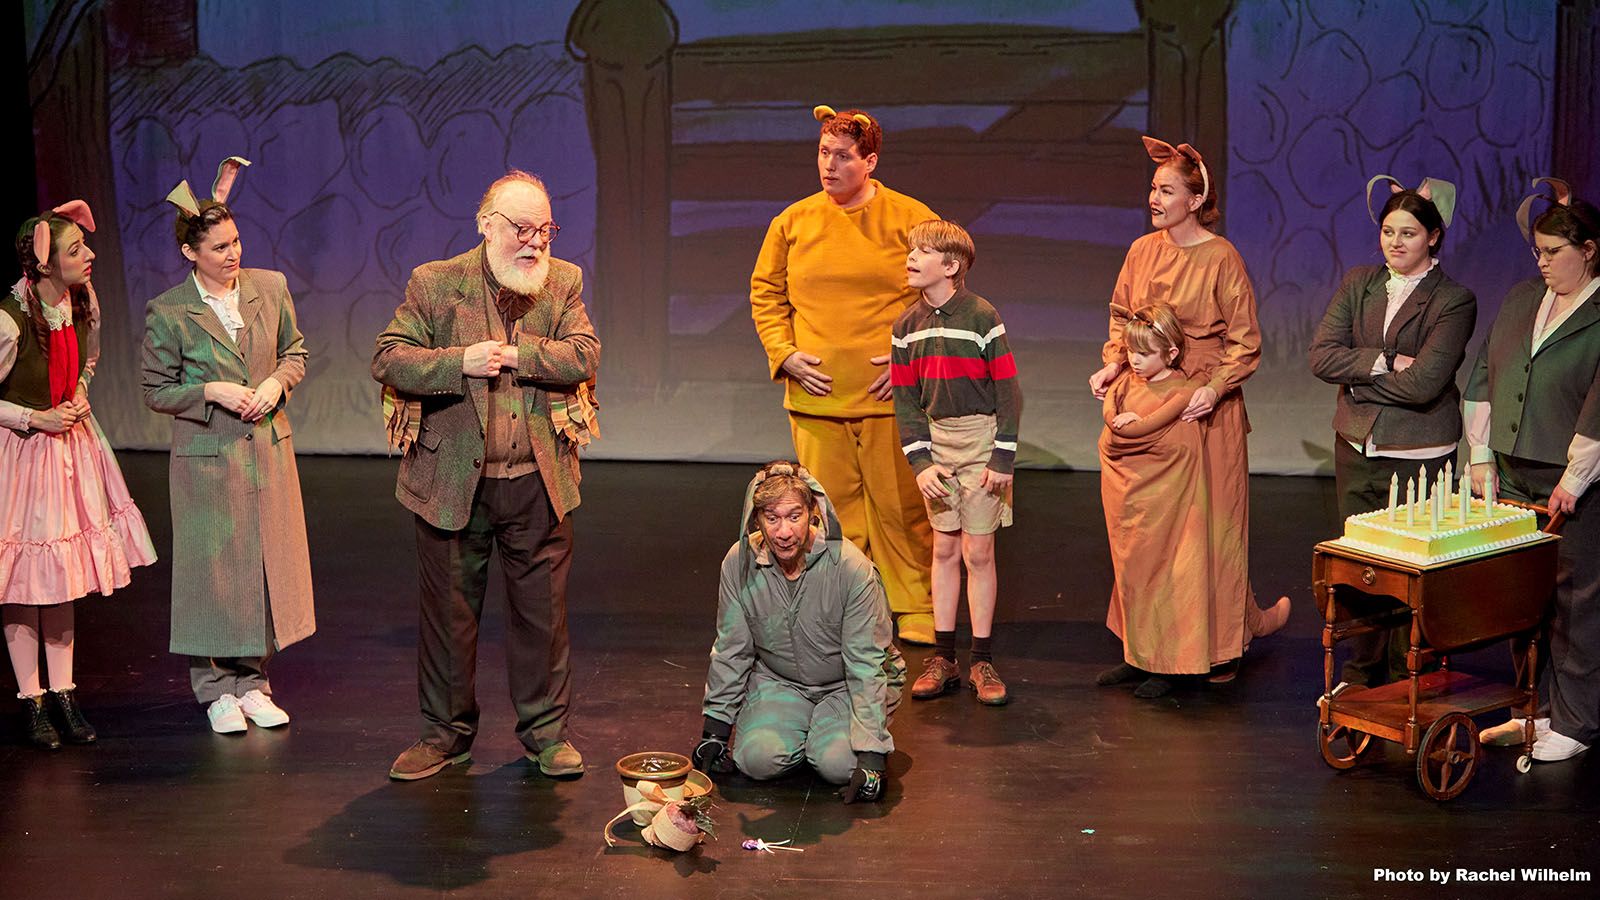 all for One productions’ Winnie-the-Pooh: A Dream of Honey continues April 26-28 at PPG ArtsLab in downtown Fort Wayne.